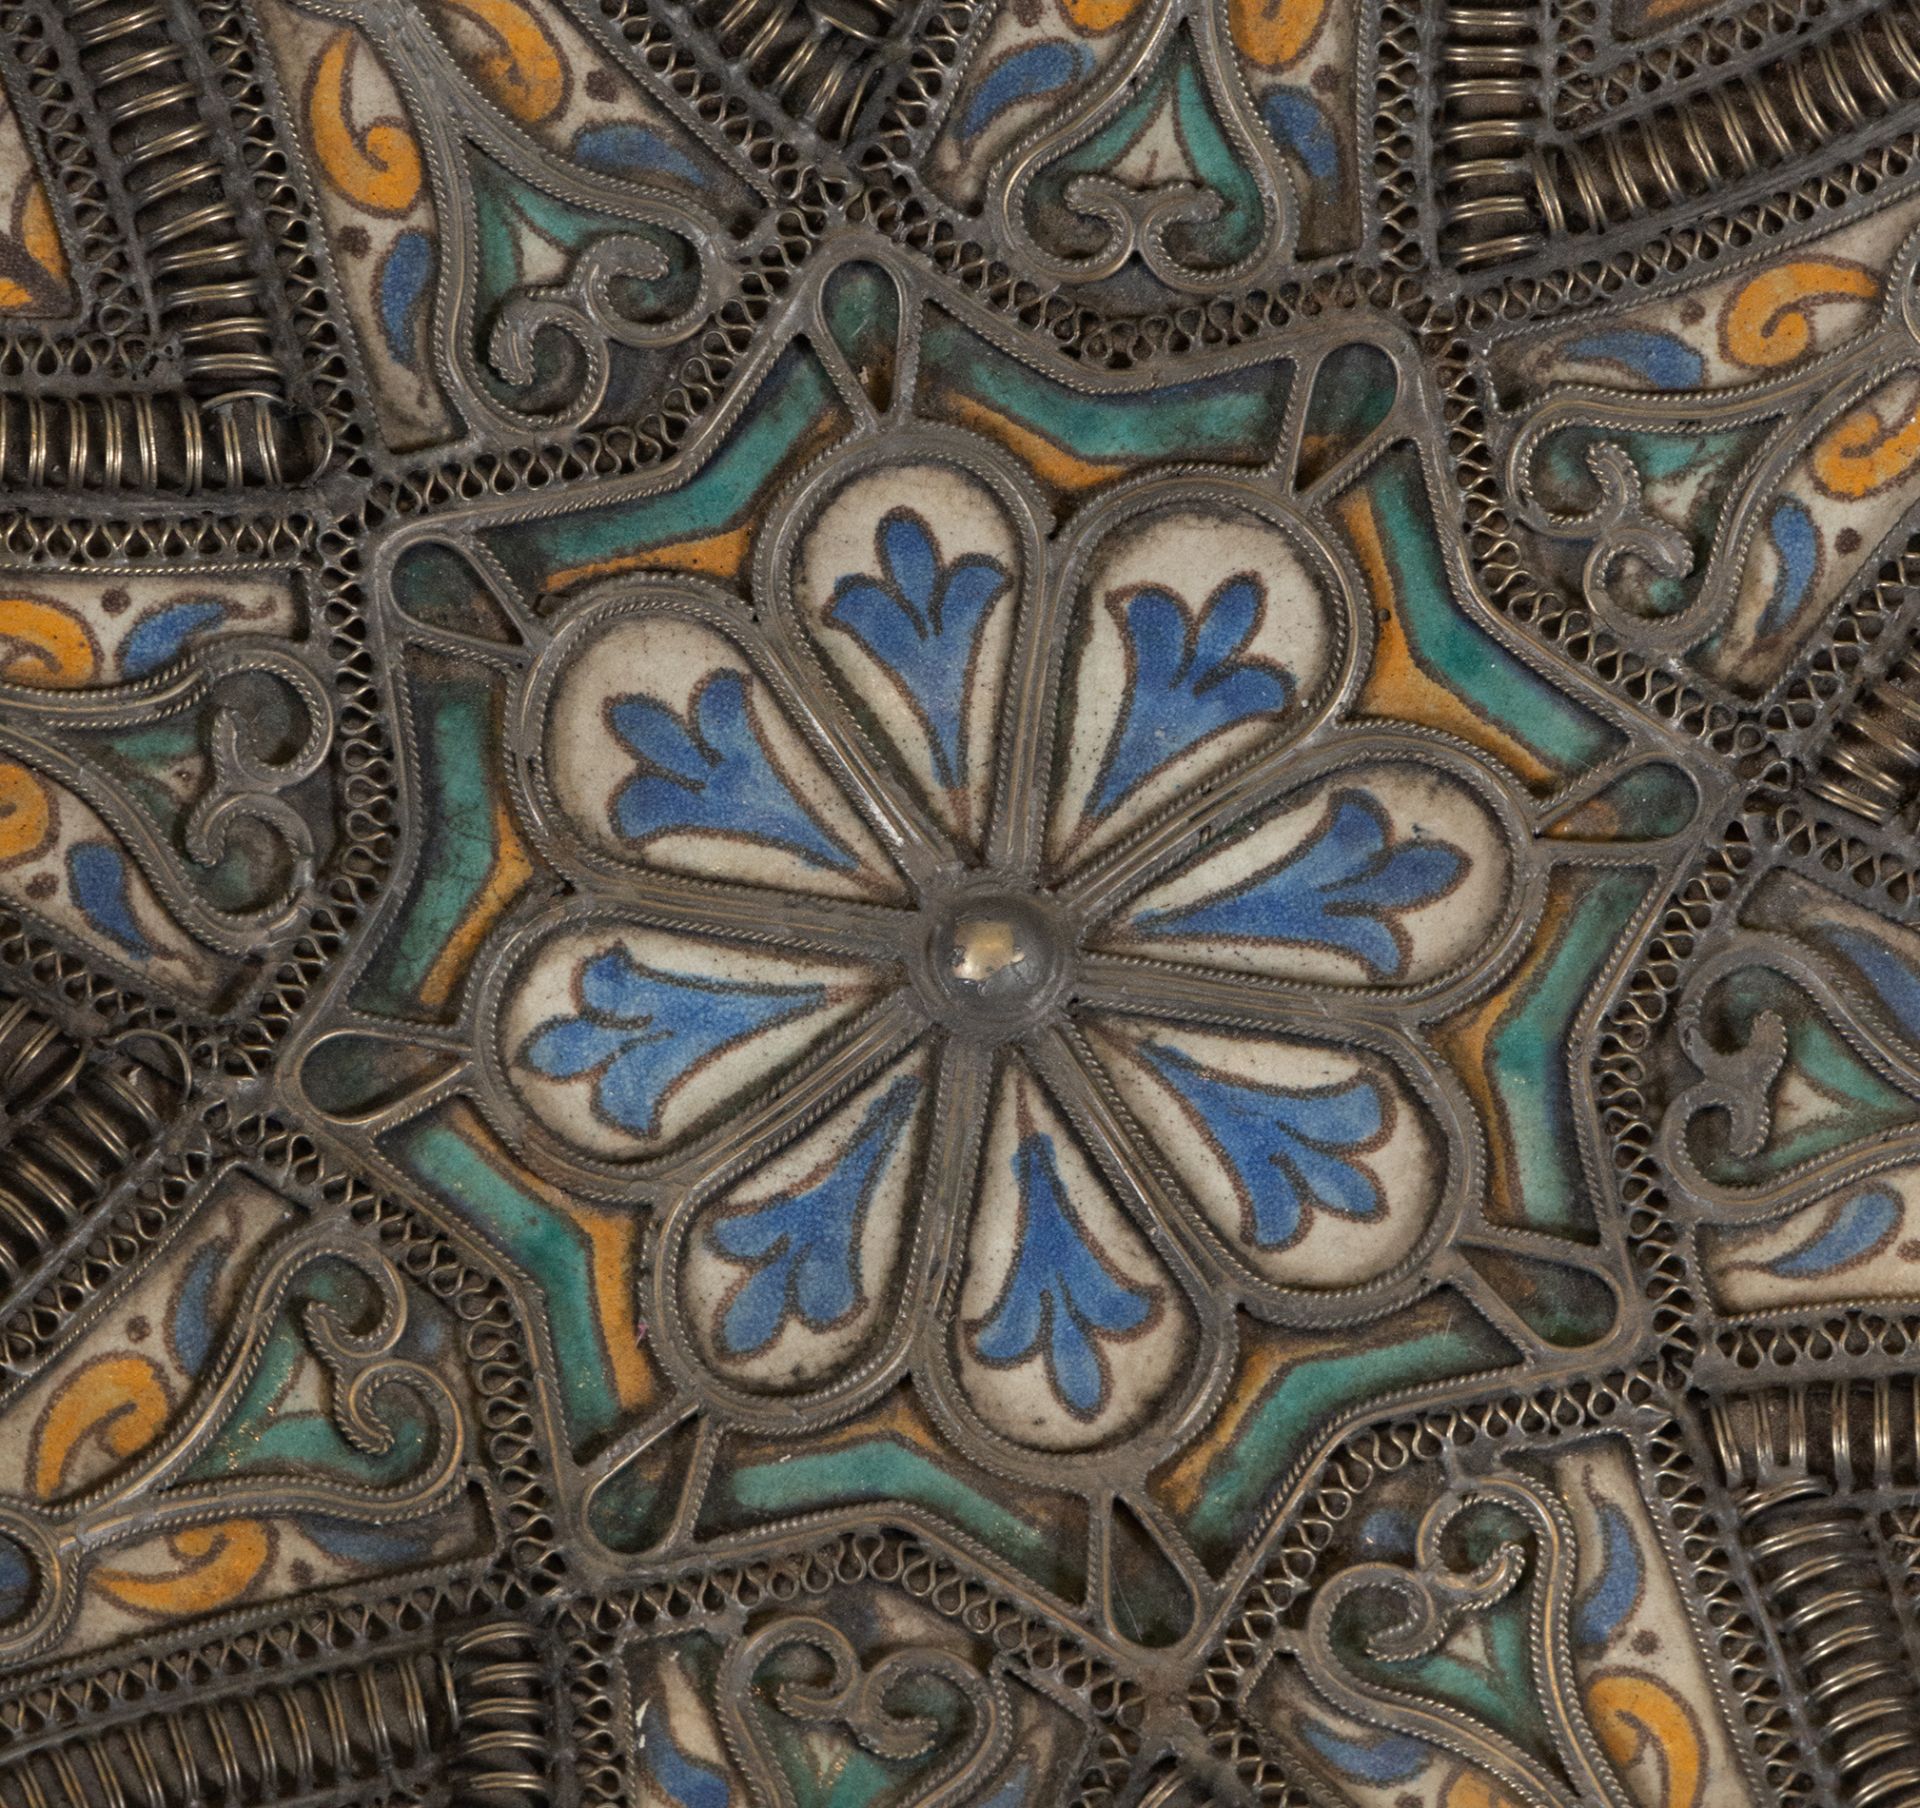 Moroccan plate (Ceramic of Fez) mounted in silver filigree, 19th century - Image 2 of 2